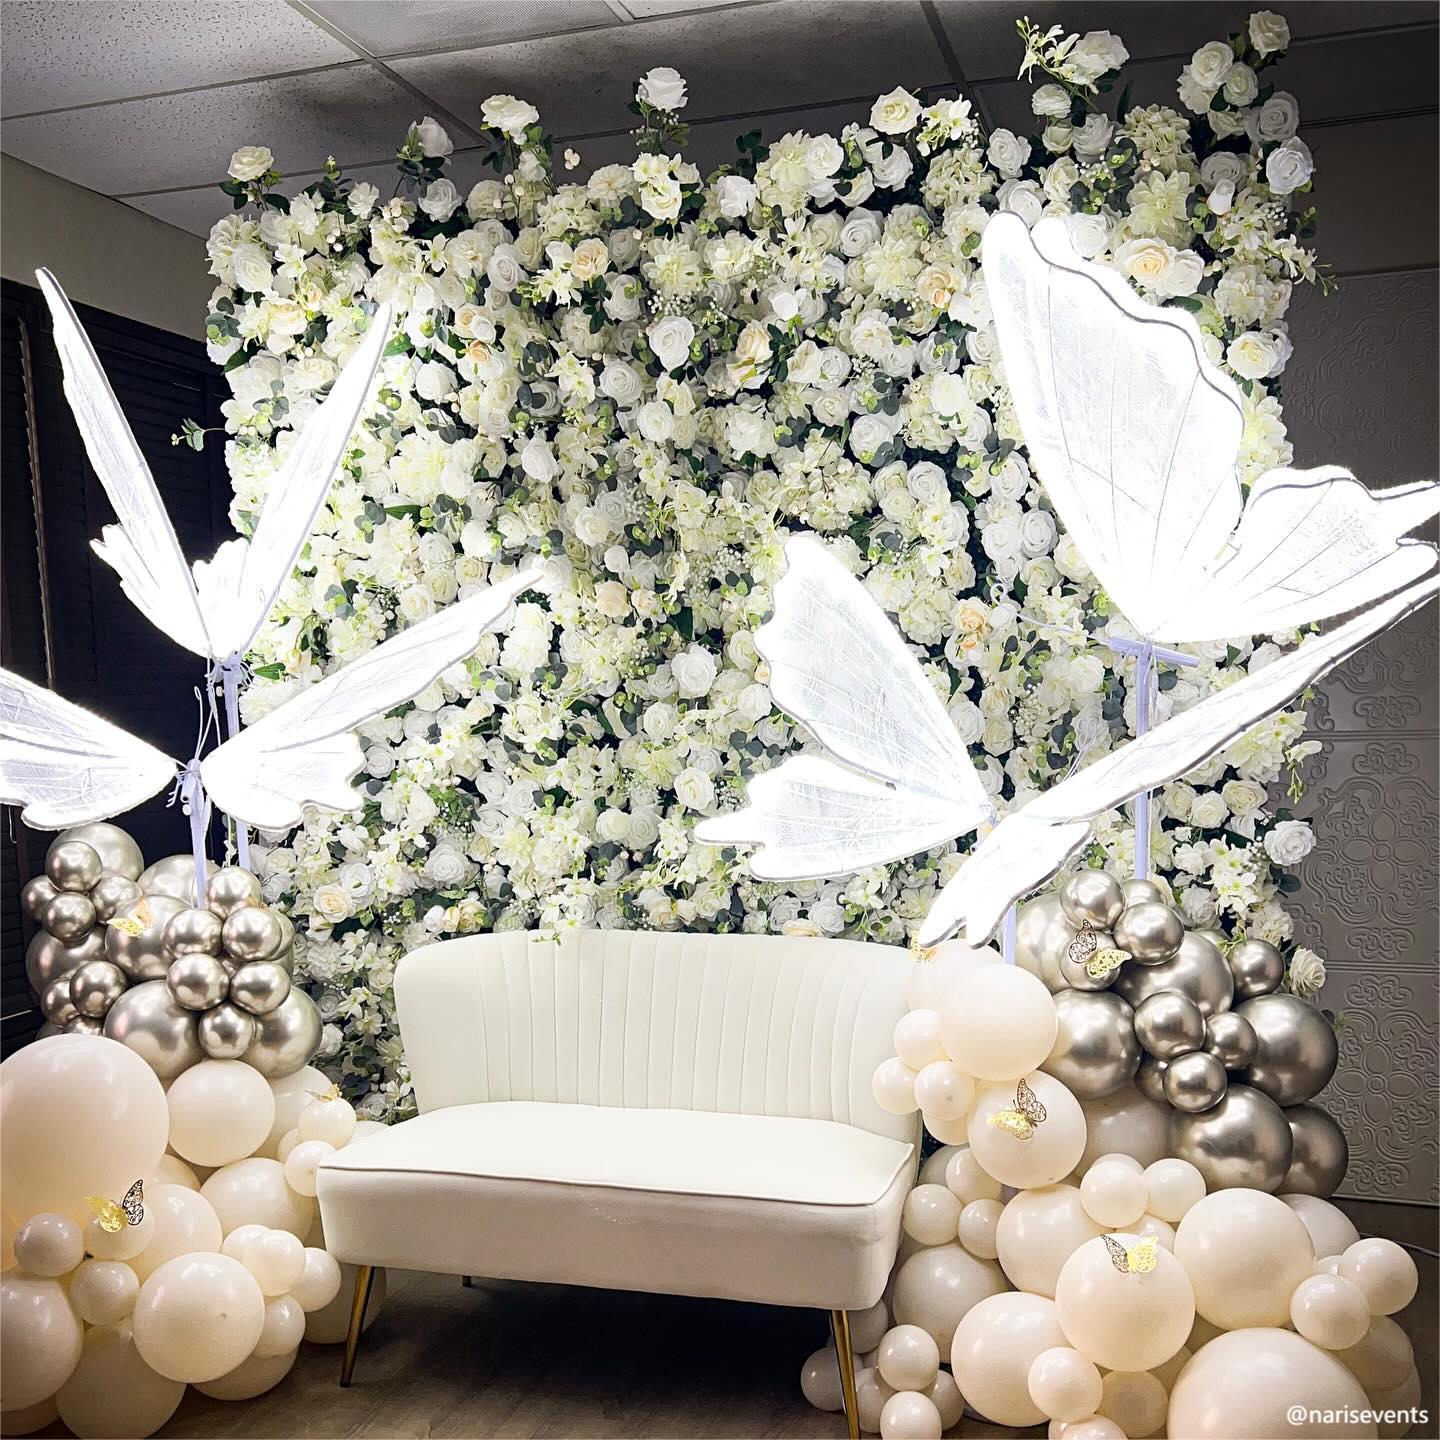 Butterfly ornaments make the white champagne flower wall looks more sophisticated and elegant.